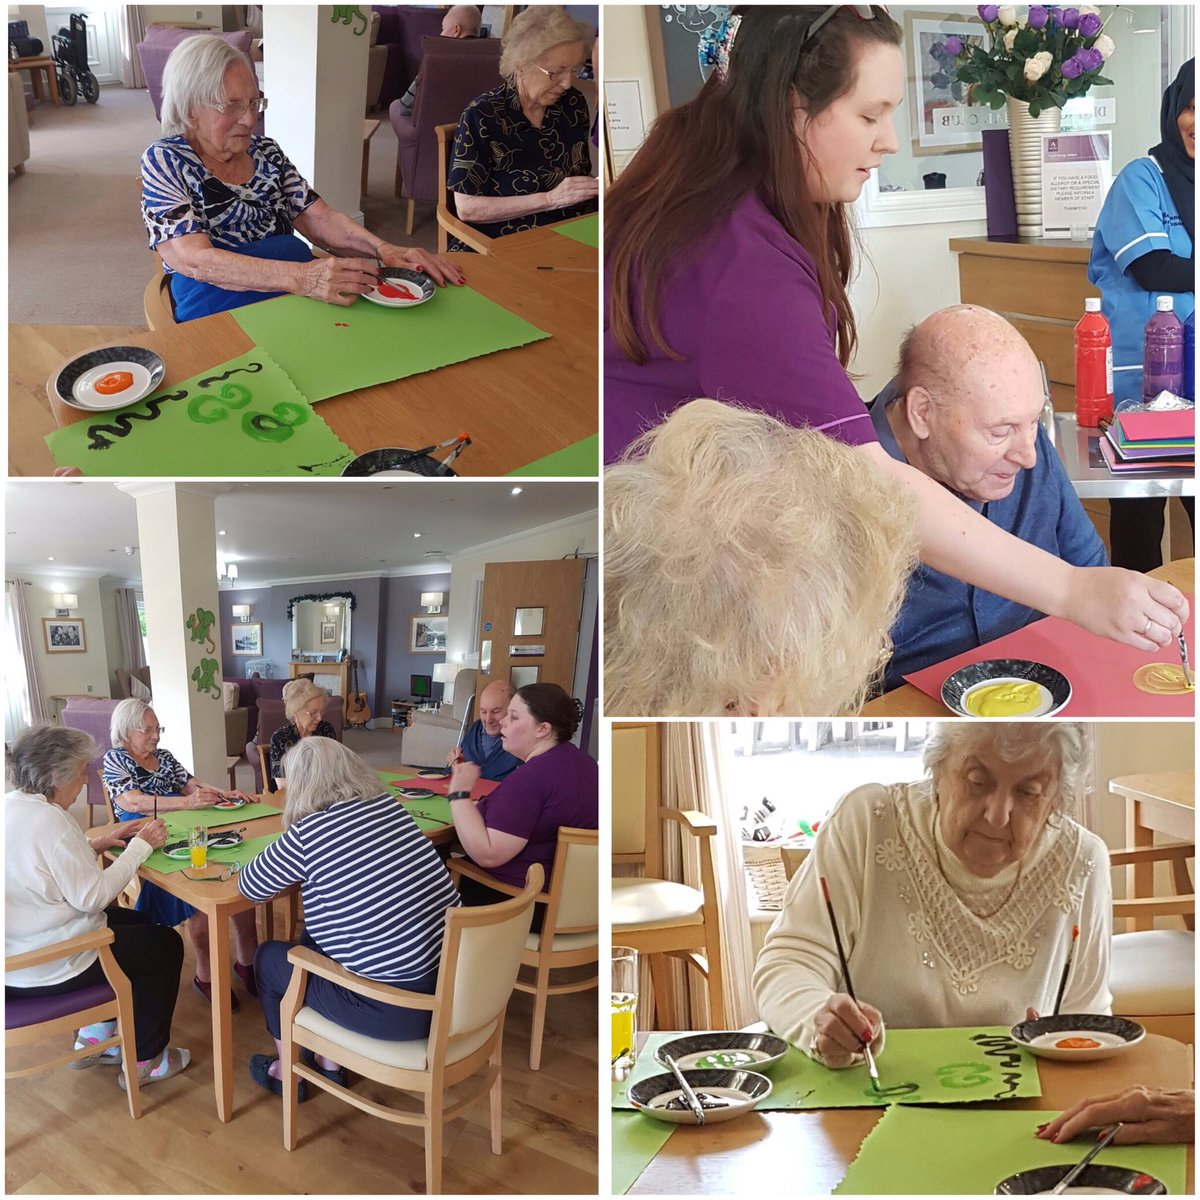 Arts & Crafts before an afternoon in the sun! #stgeorgesday #paintingdragons @Buck_Lodge #Care #Activities